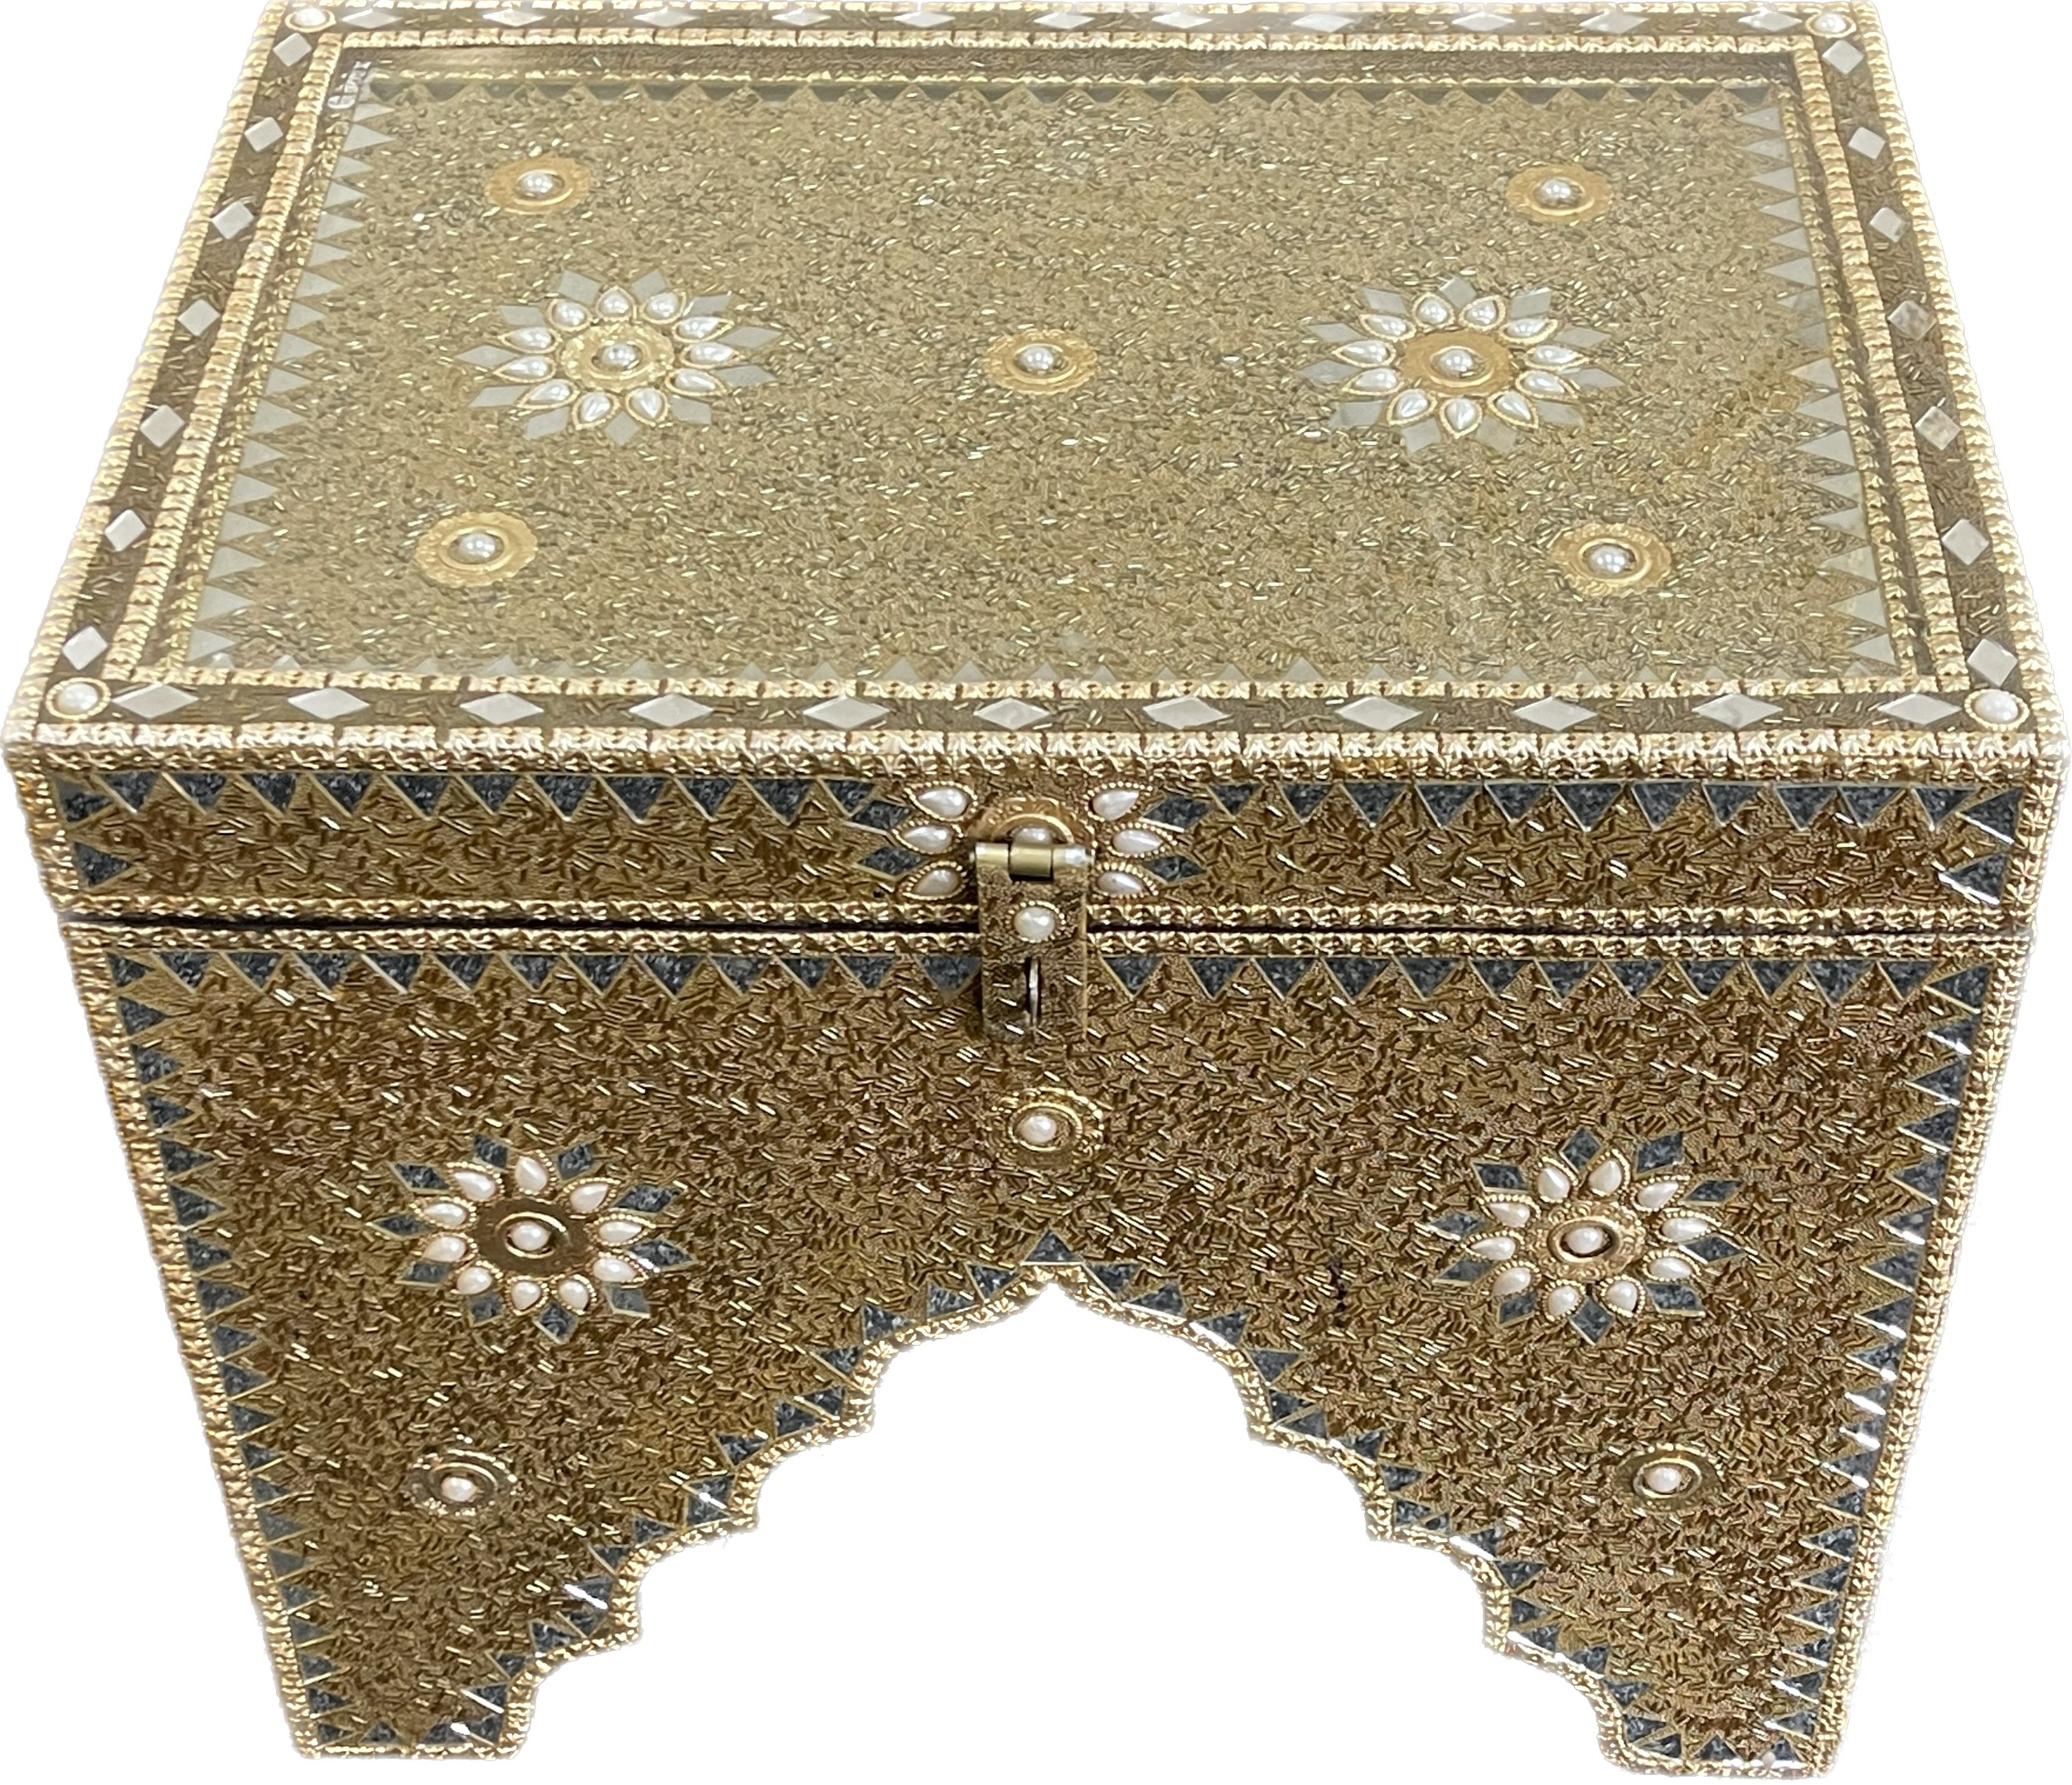 Indian style coffee table with lift up lid, Height 19 inches, Width 22 inches, Depth 16 inches